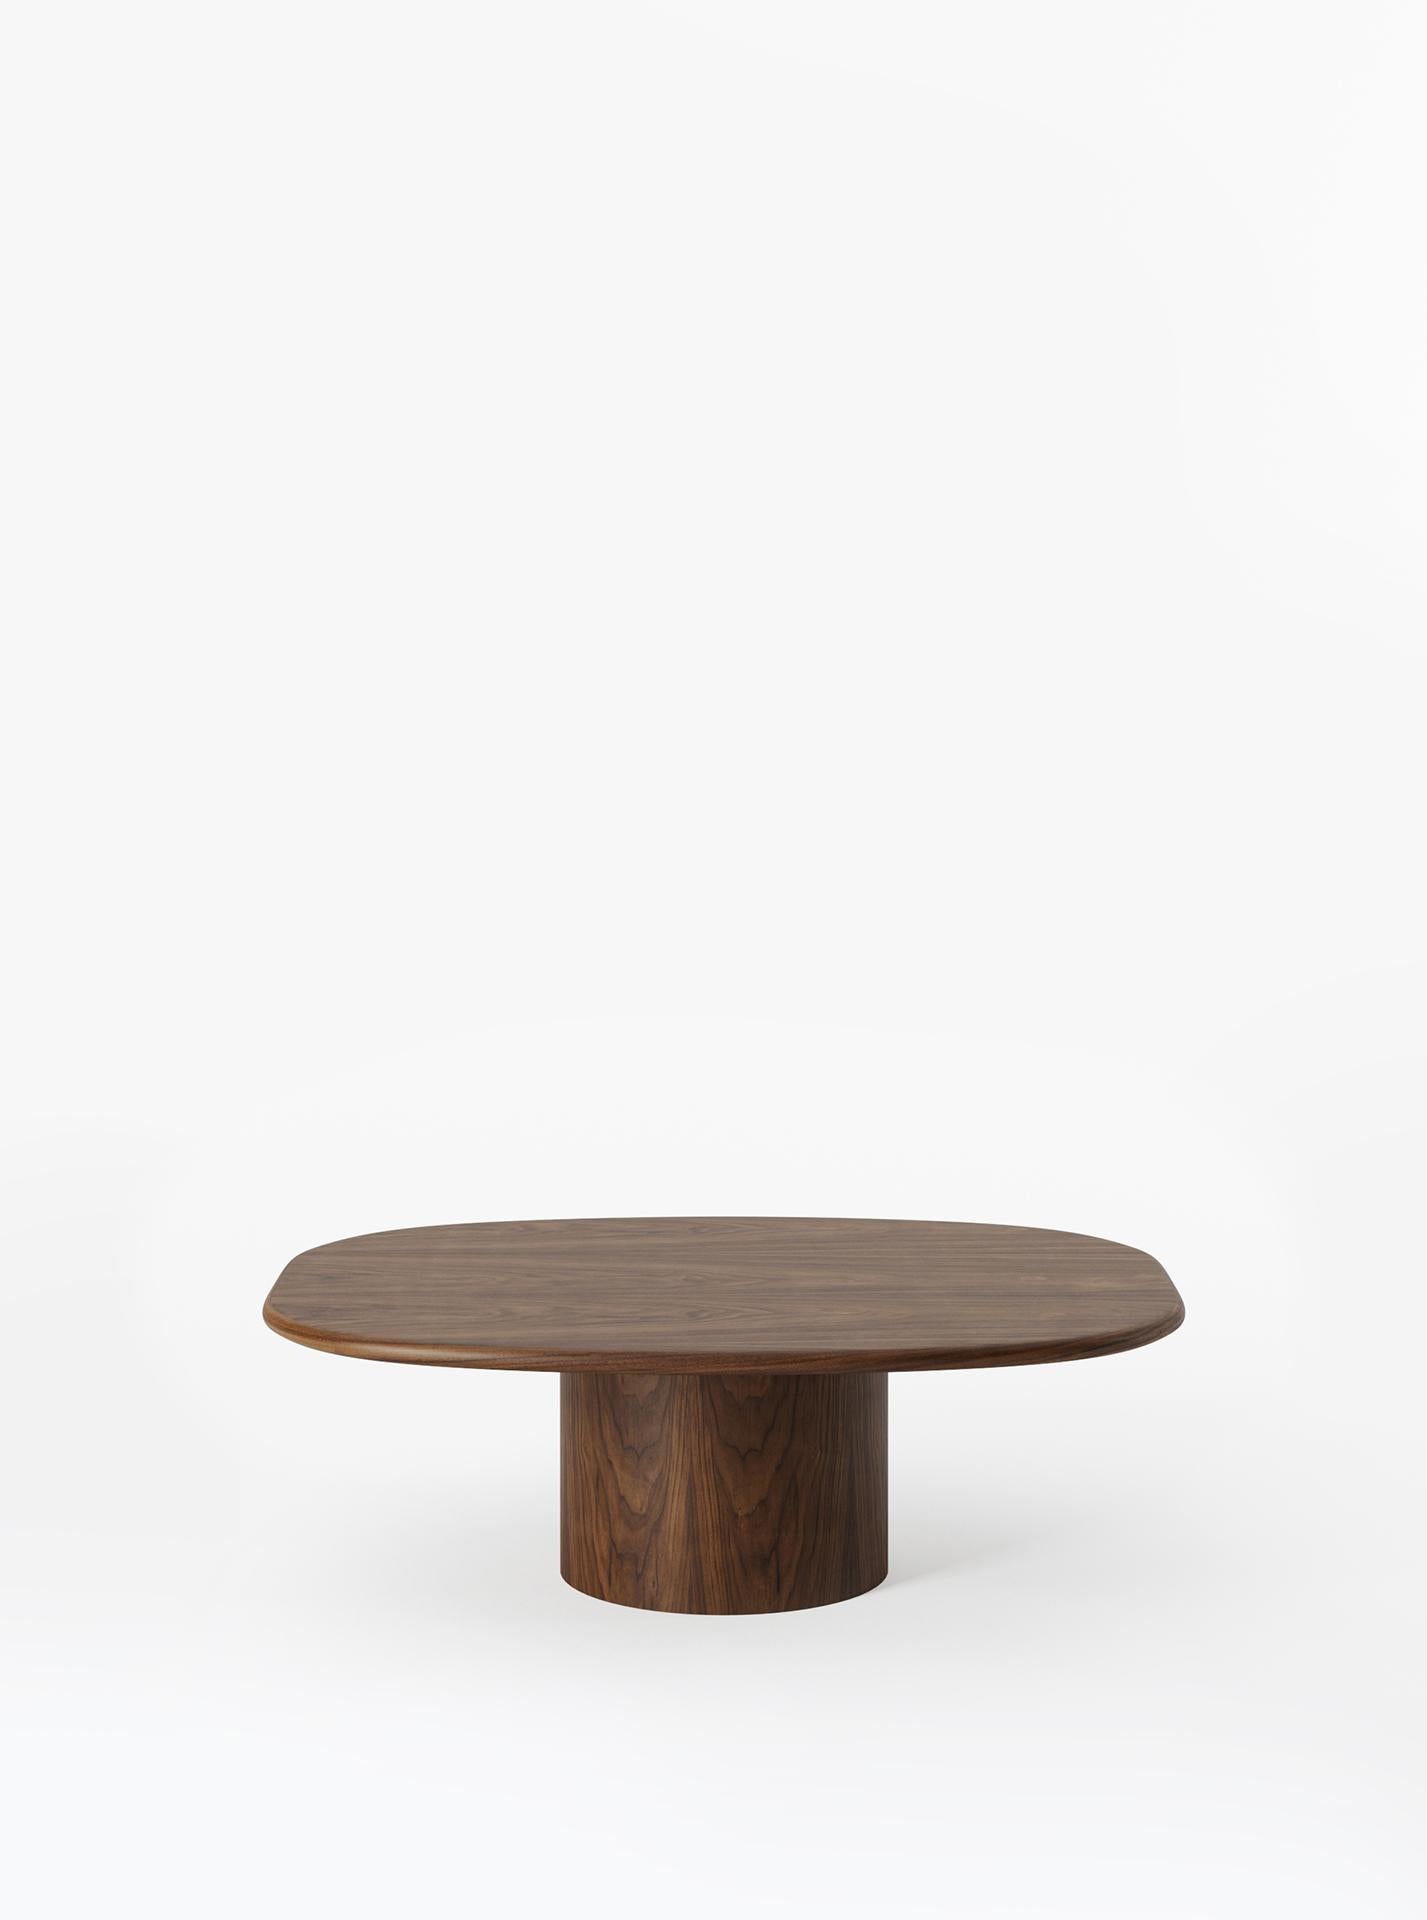 Through the introduction of the Circa coffee table, esteemed collaborator Yaniv Chen demonstrates a mastery of simplicity, presenting an exquisite organic centerpiece. This remarkable table boasts a substantial profile adorned with gracefully